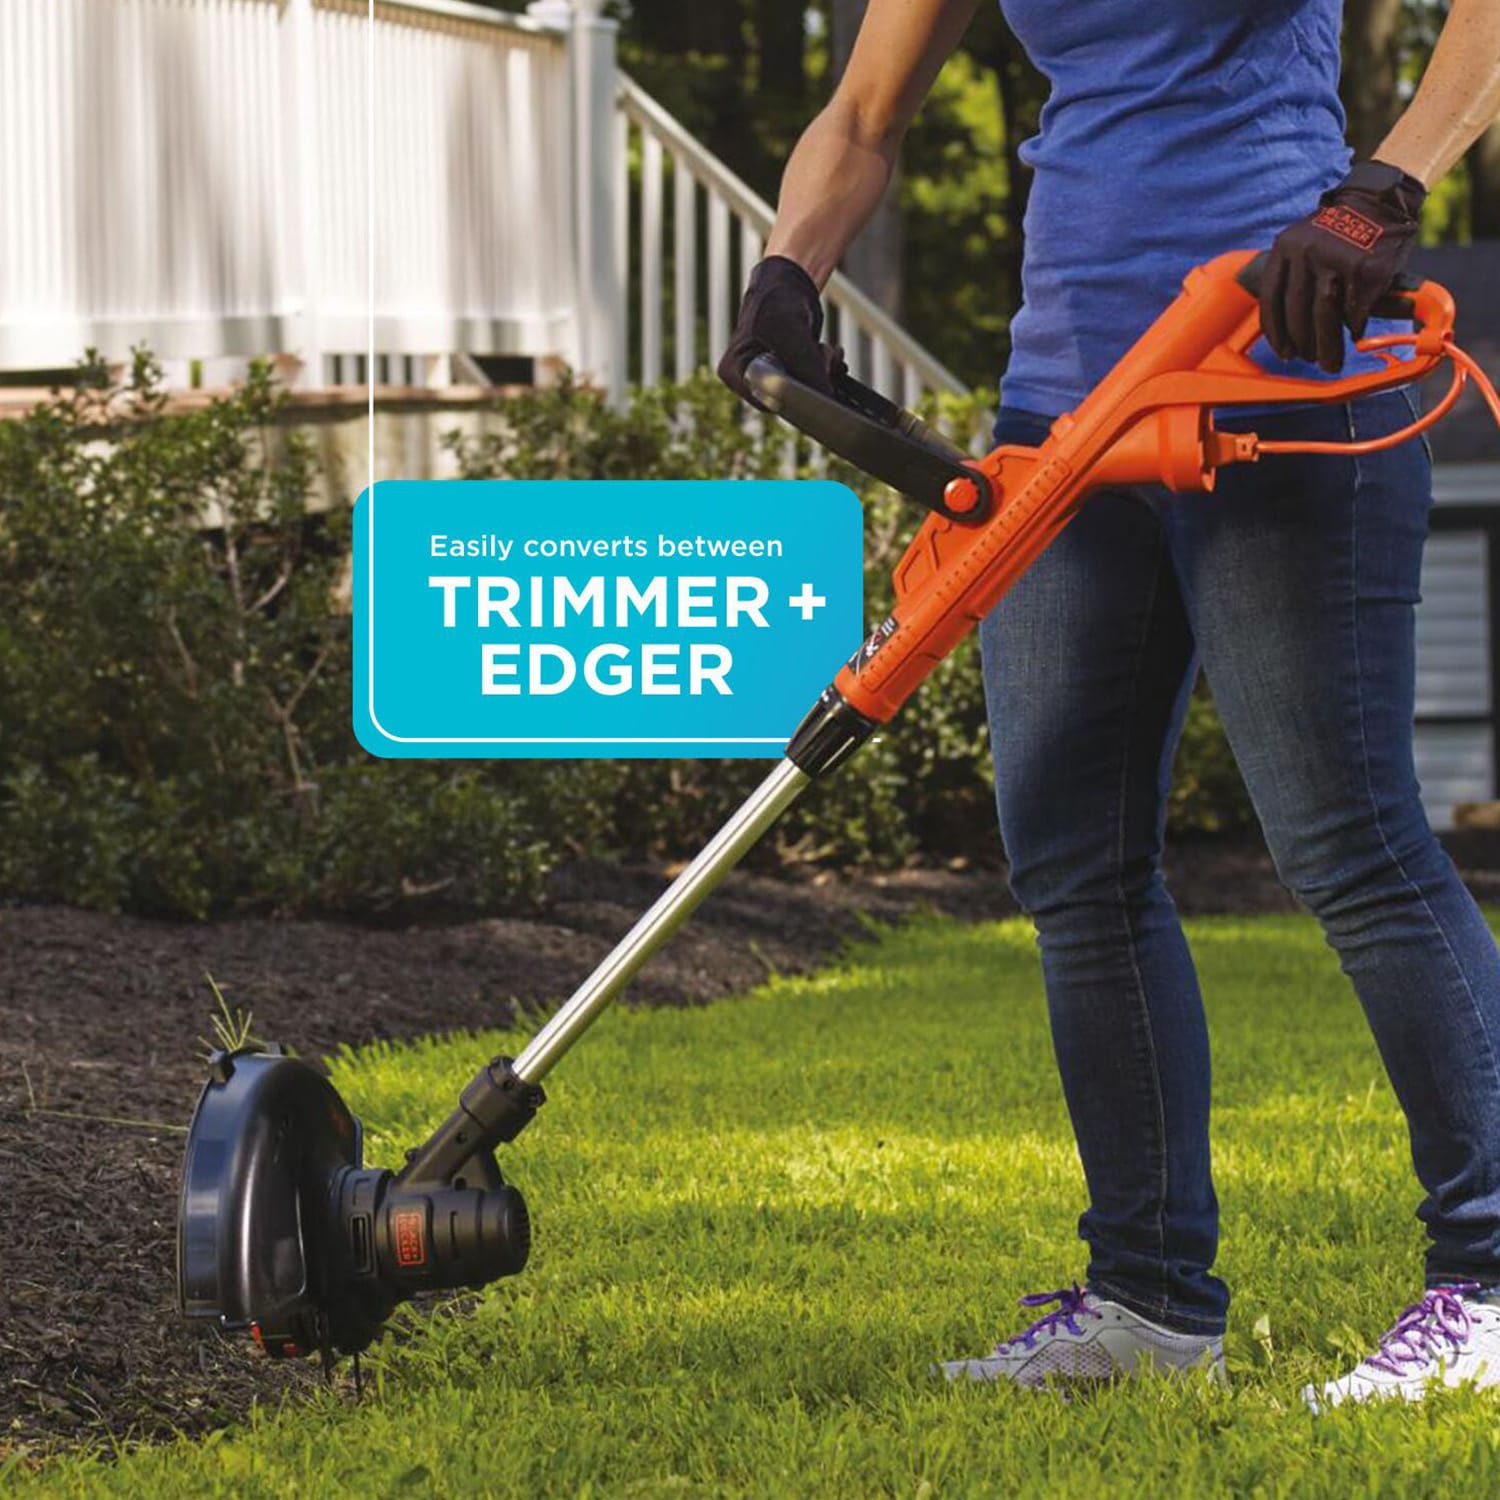 Black & Decker® - Electric Corded String Trimmer and Edger